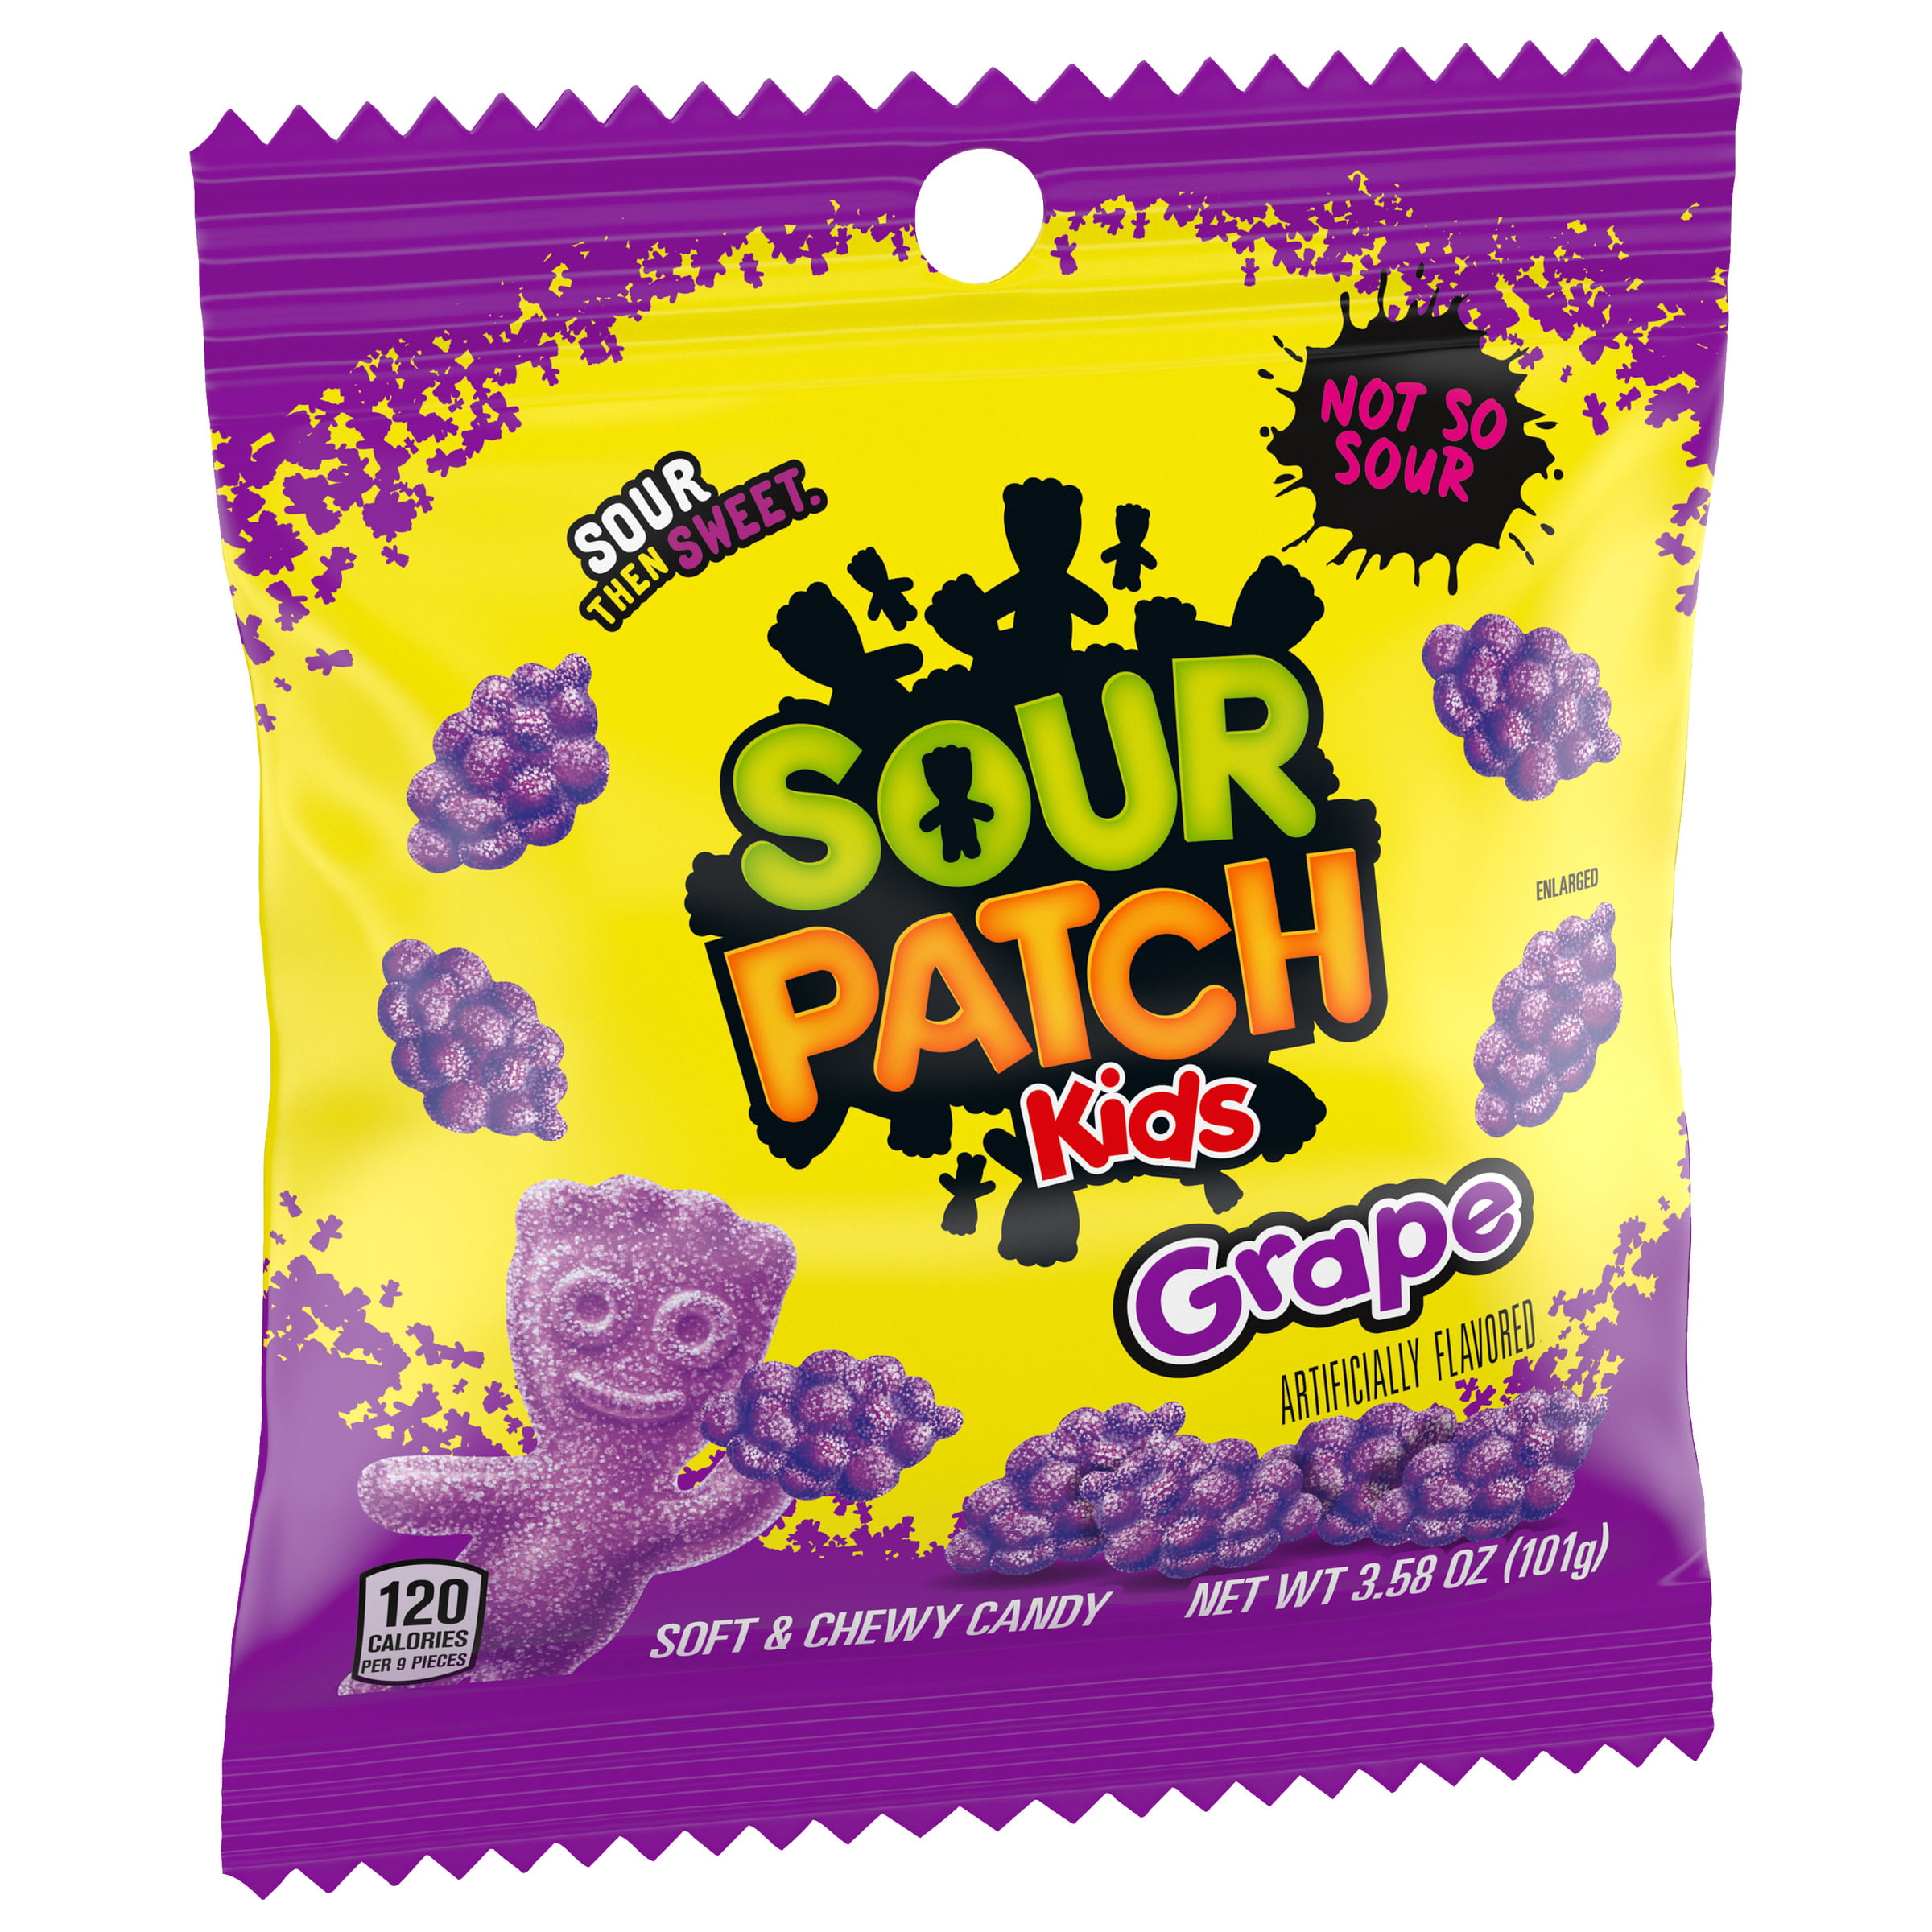 SOUR PATCH KIDS Grape Soft and Chewy Candy, 3.58 oz